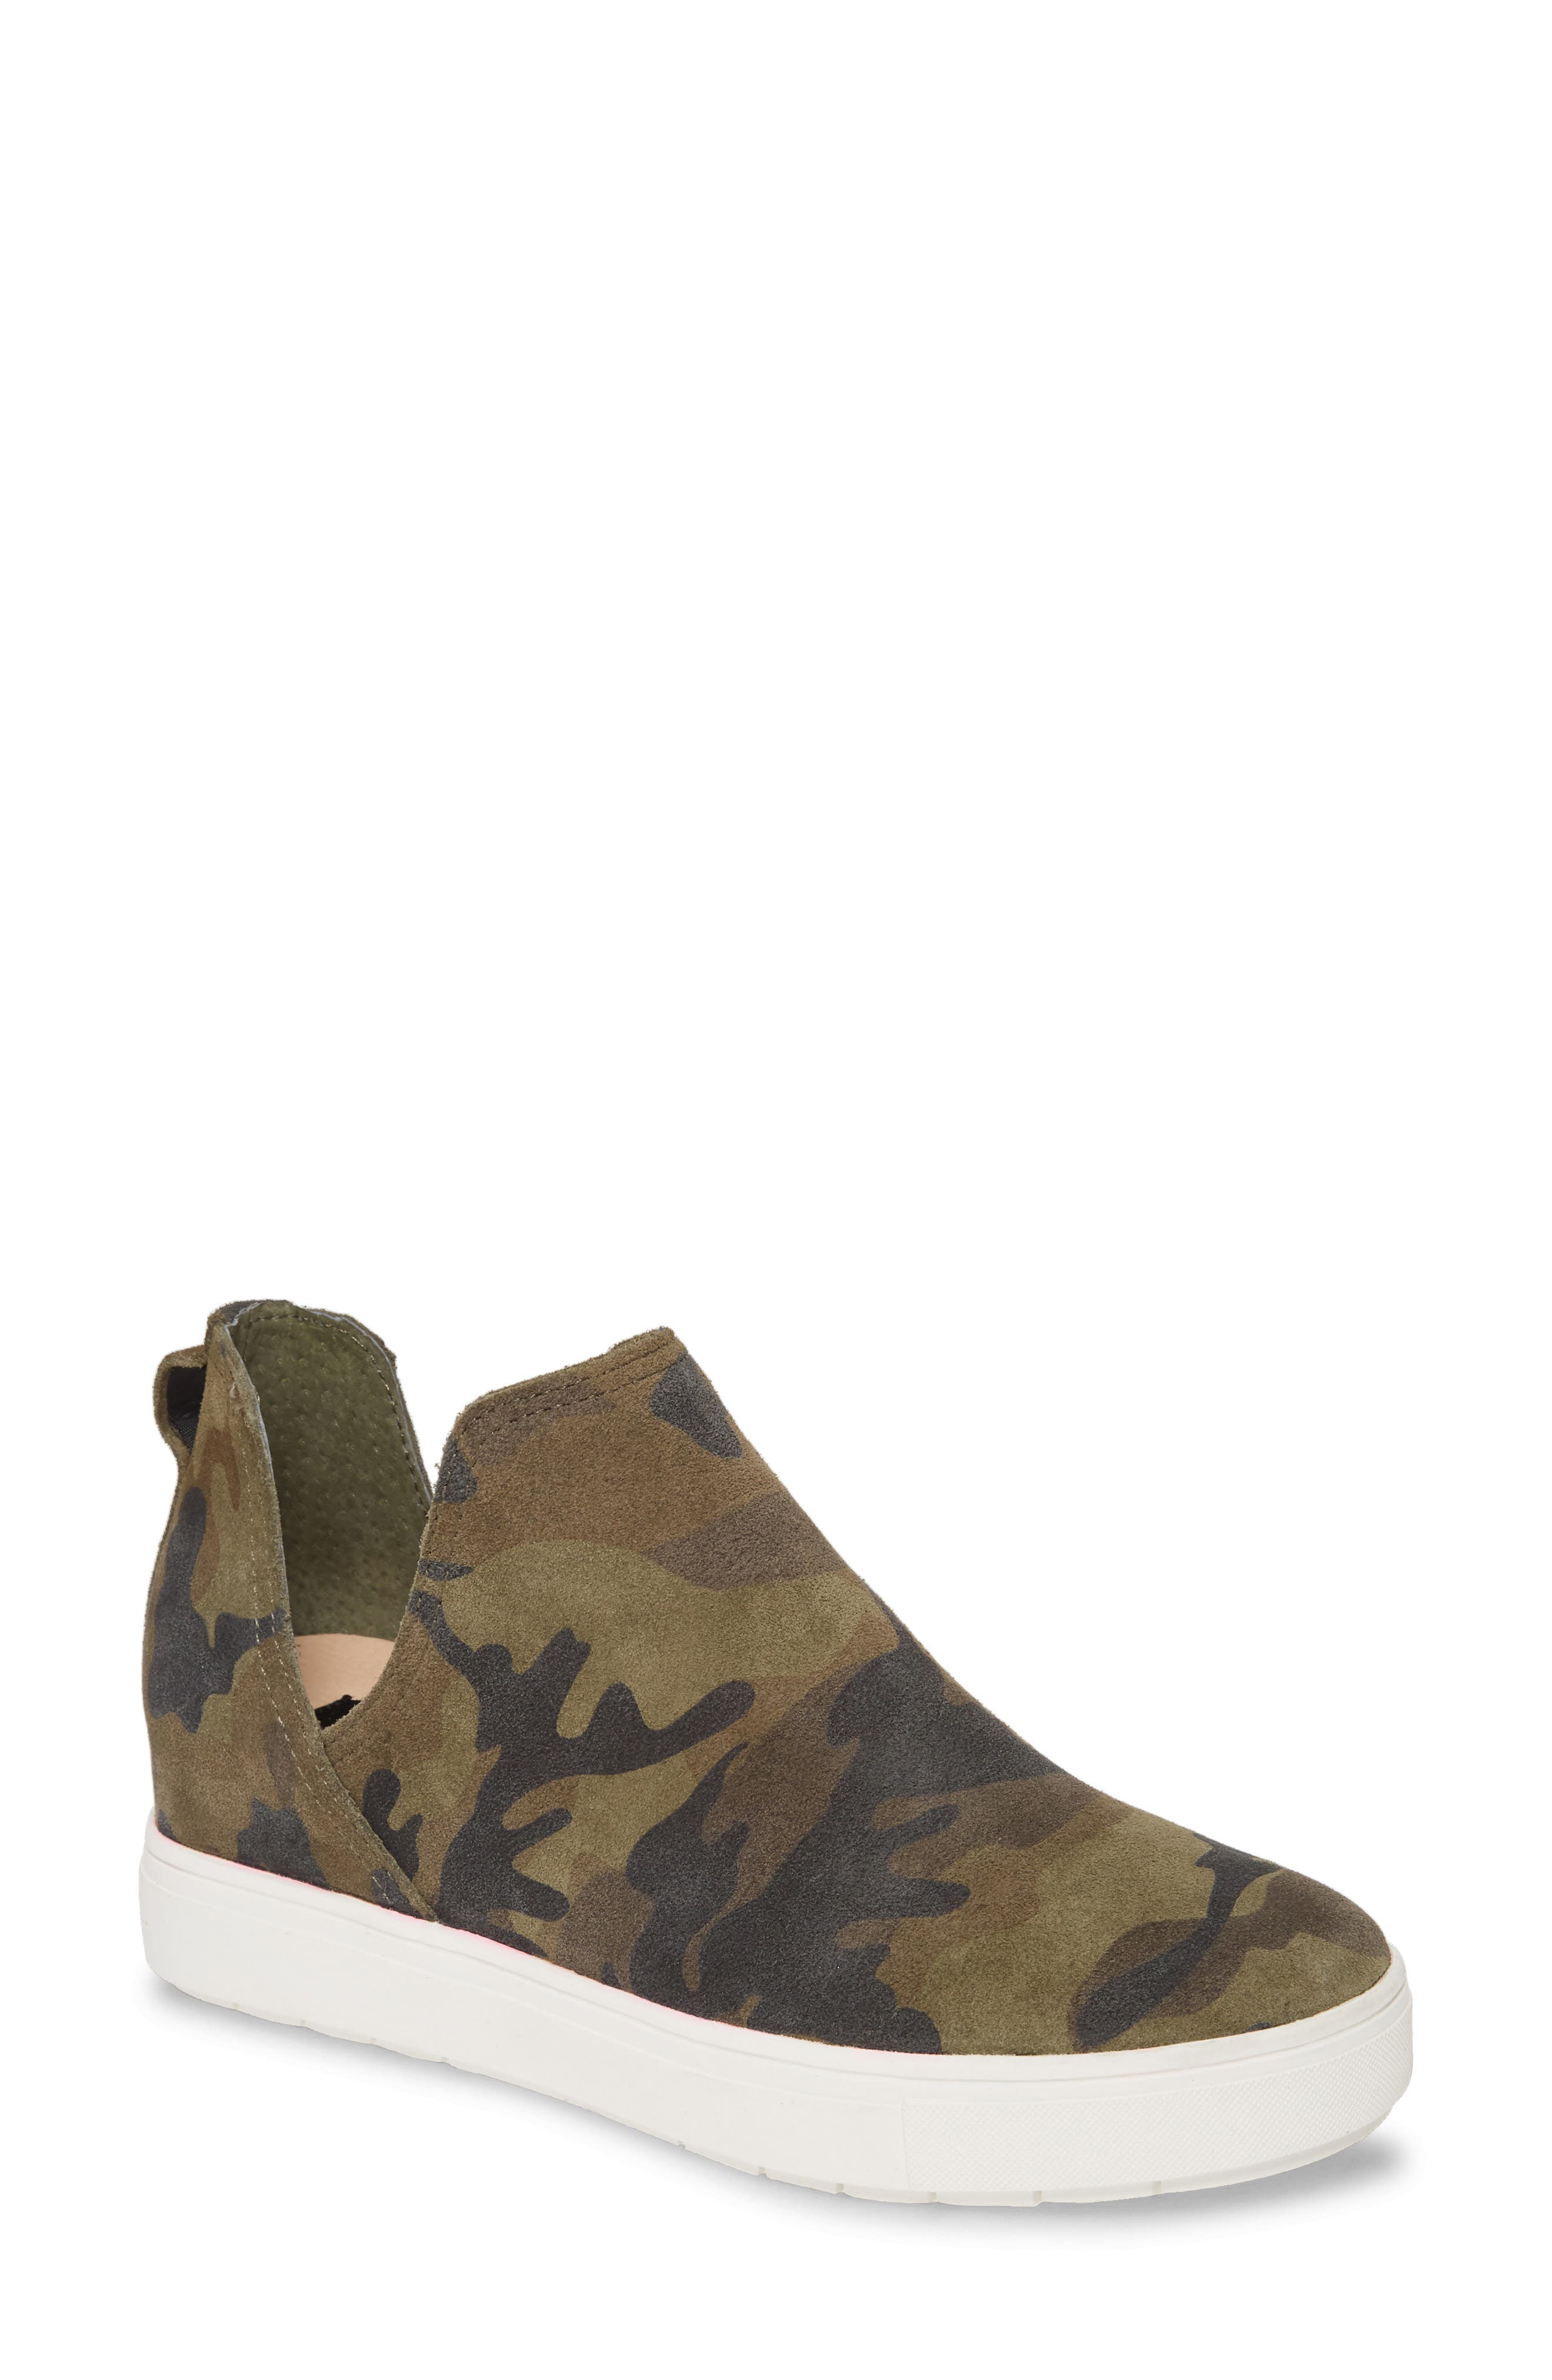 steven by steve madden canares sneakers